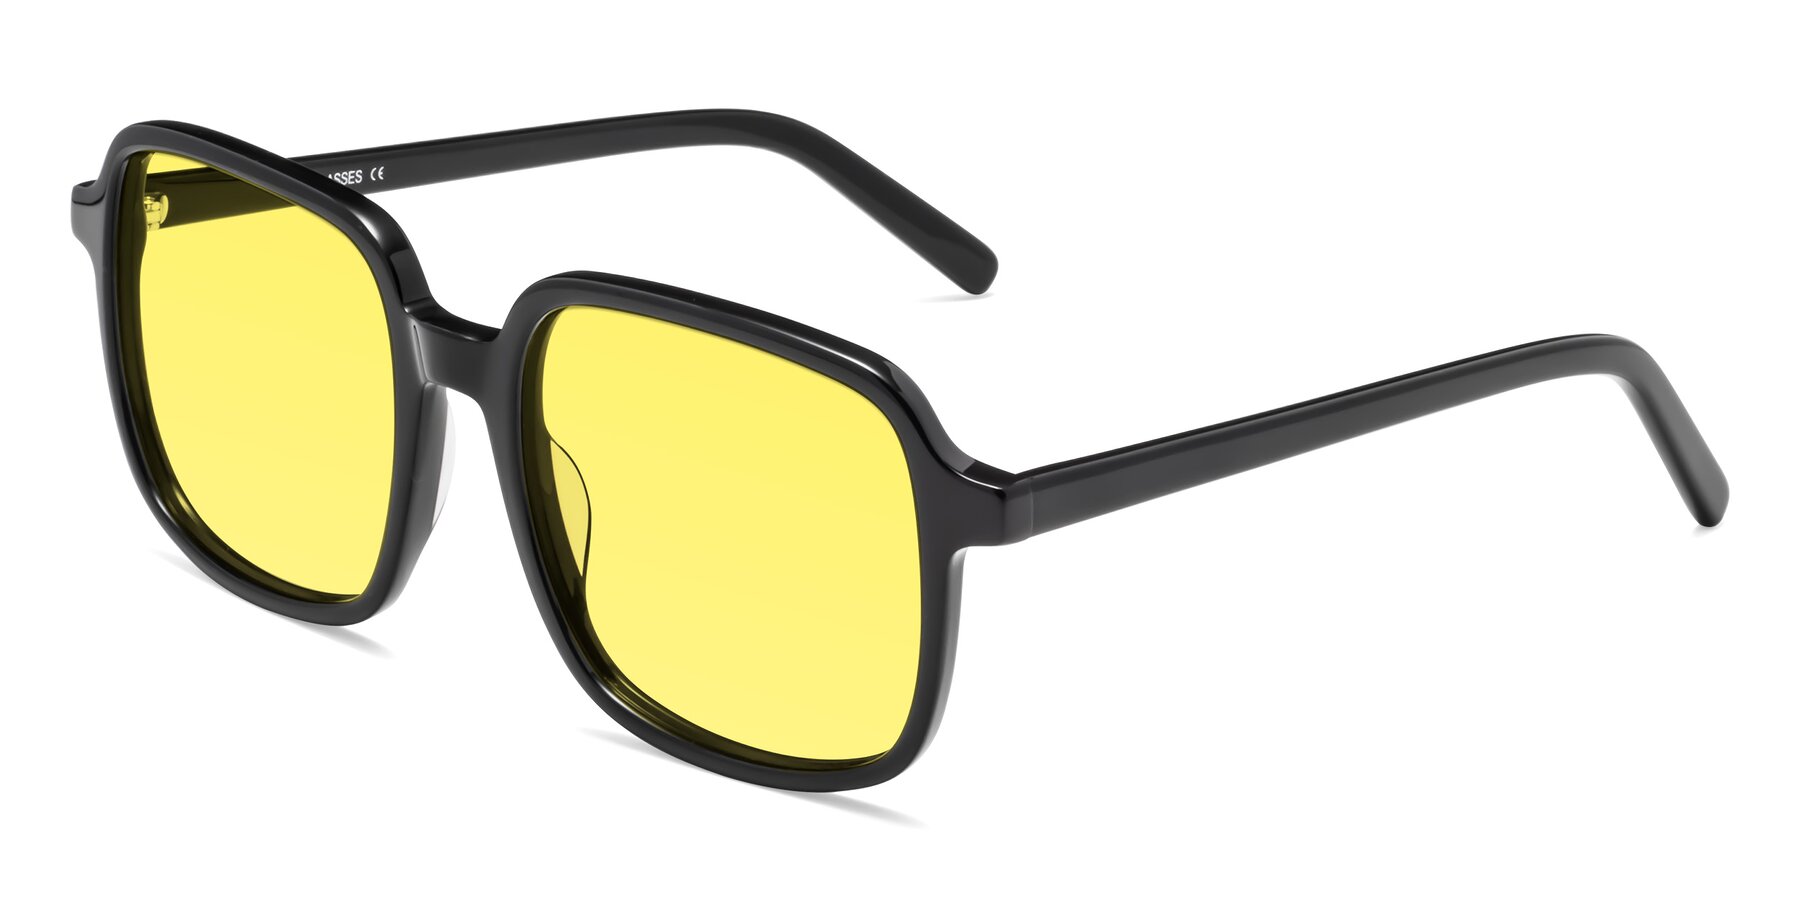 Black Hipster Lenses Medium Square with Oversized Water Sunwear - Sunglasses Tinted Yellow